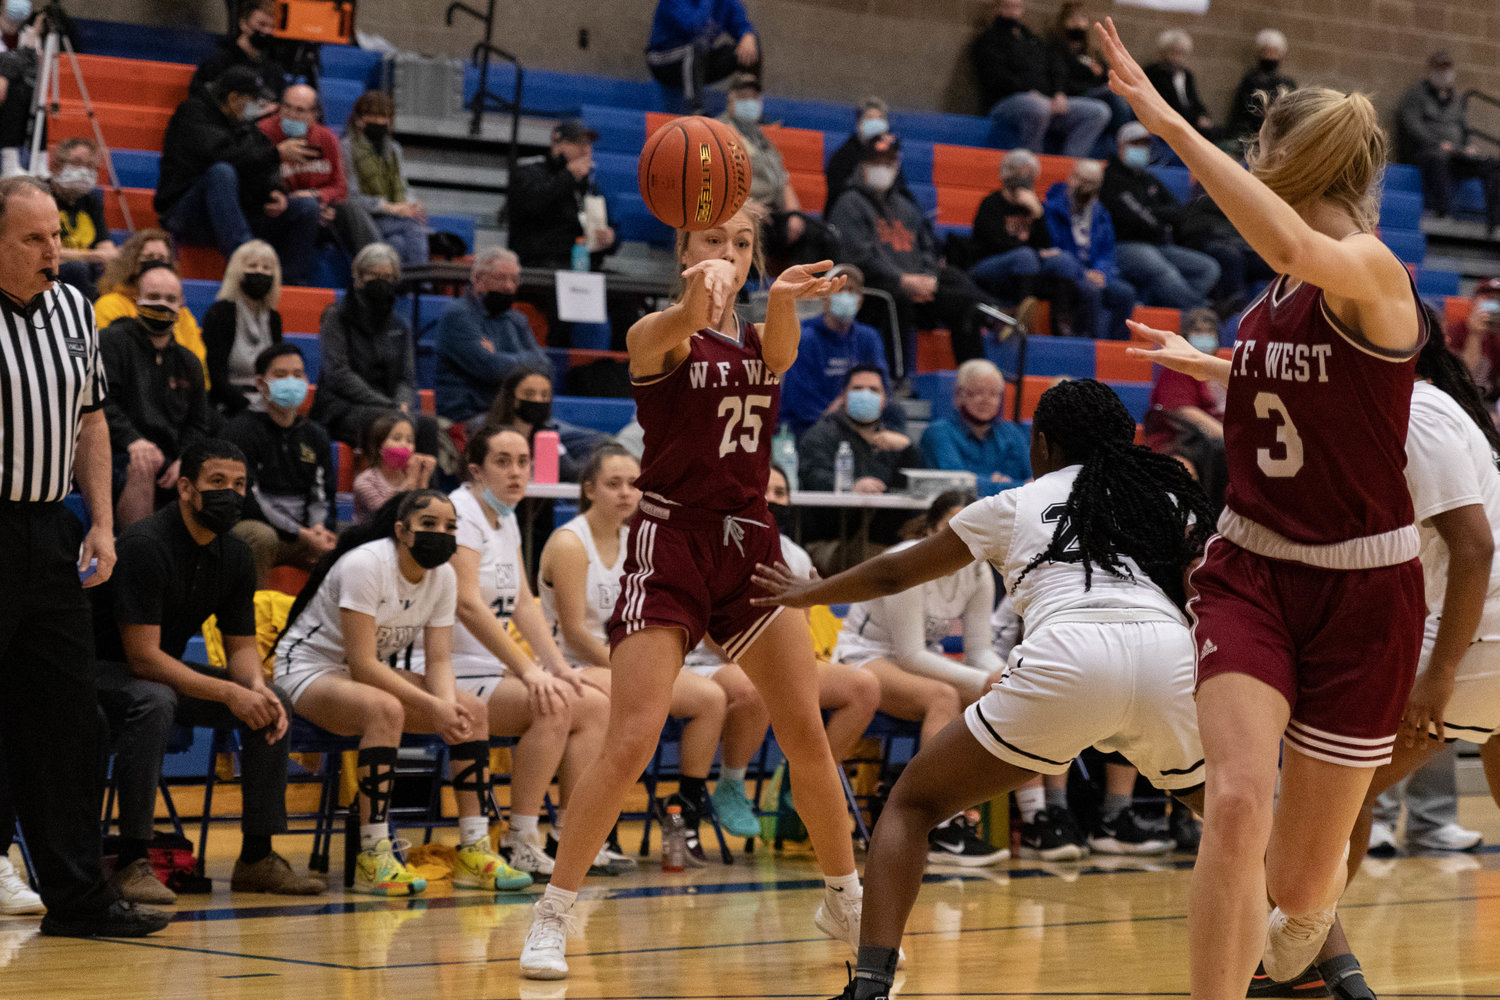 W.F. West guard Kyla McCallum launches a pass toward Lexi Roberts against Hudson's Bay in the 2A District IV semifinals at Ridgefield Feb. 14.